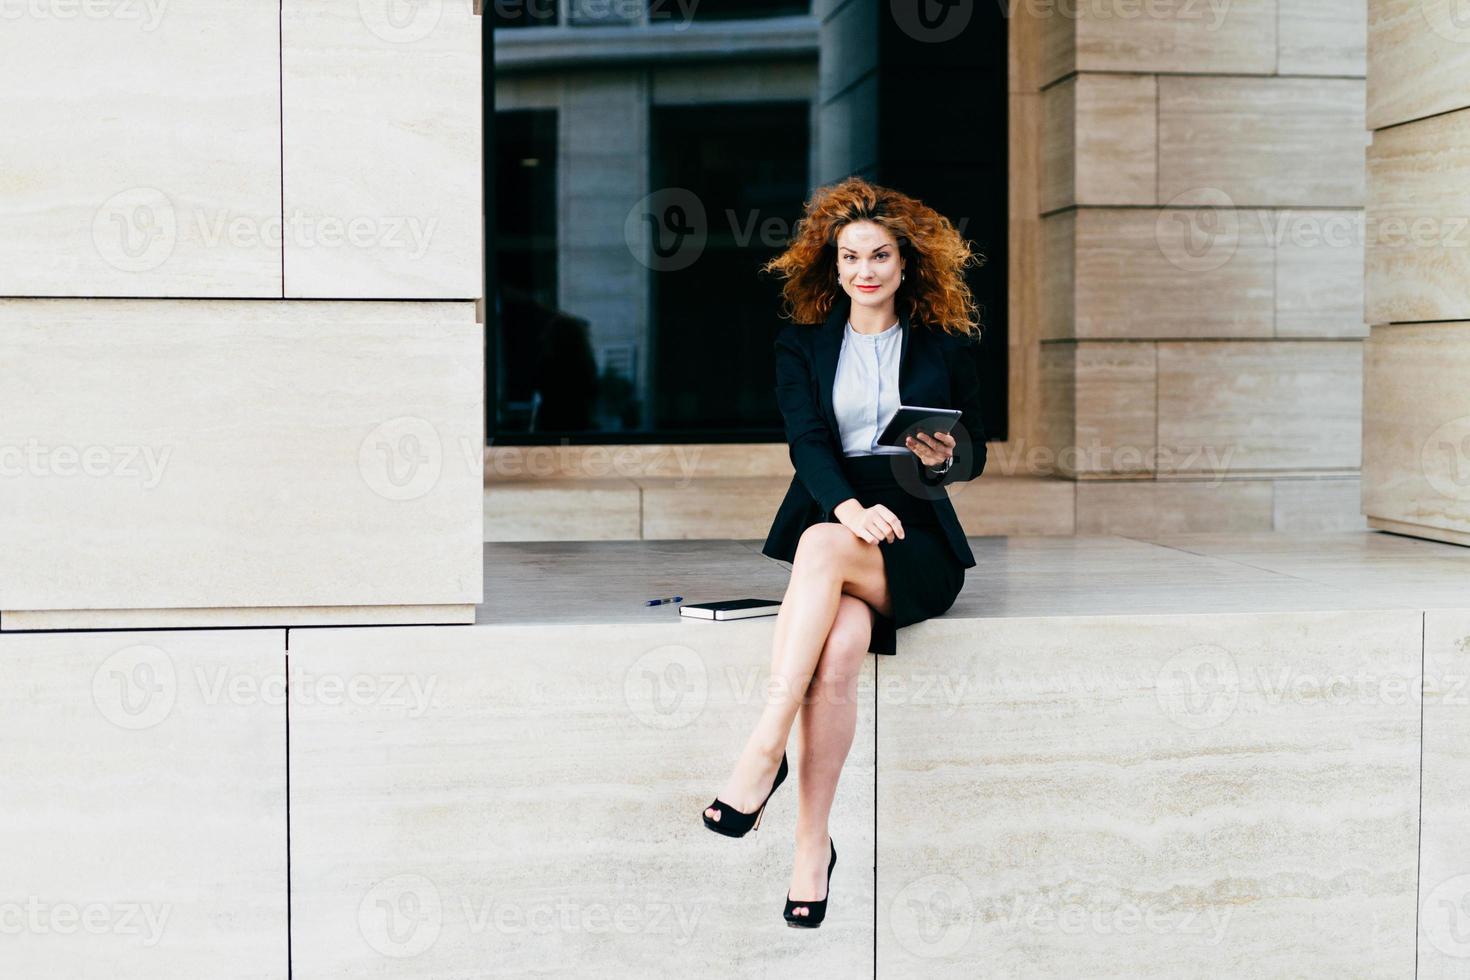 Business, career and success concept. Elegant slim young businesswoman wearing black suit and high-heeled shoes, sitting crossed legs while holding modern gadget, looking confidently into camera photo